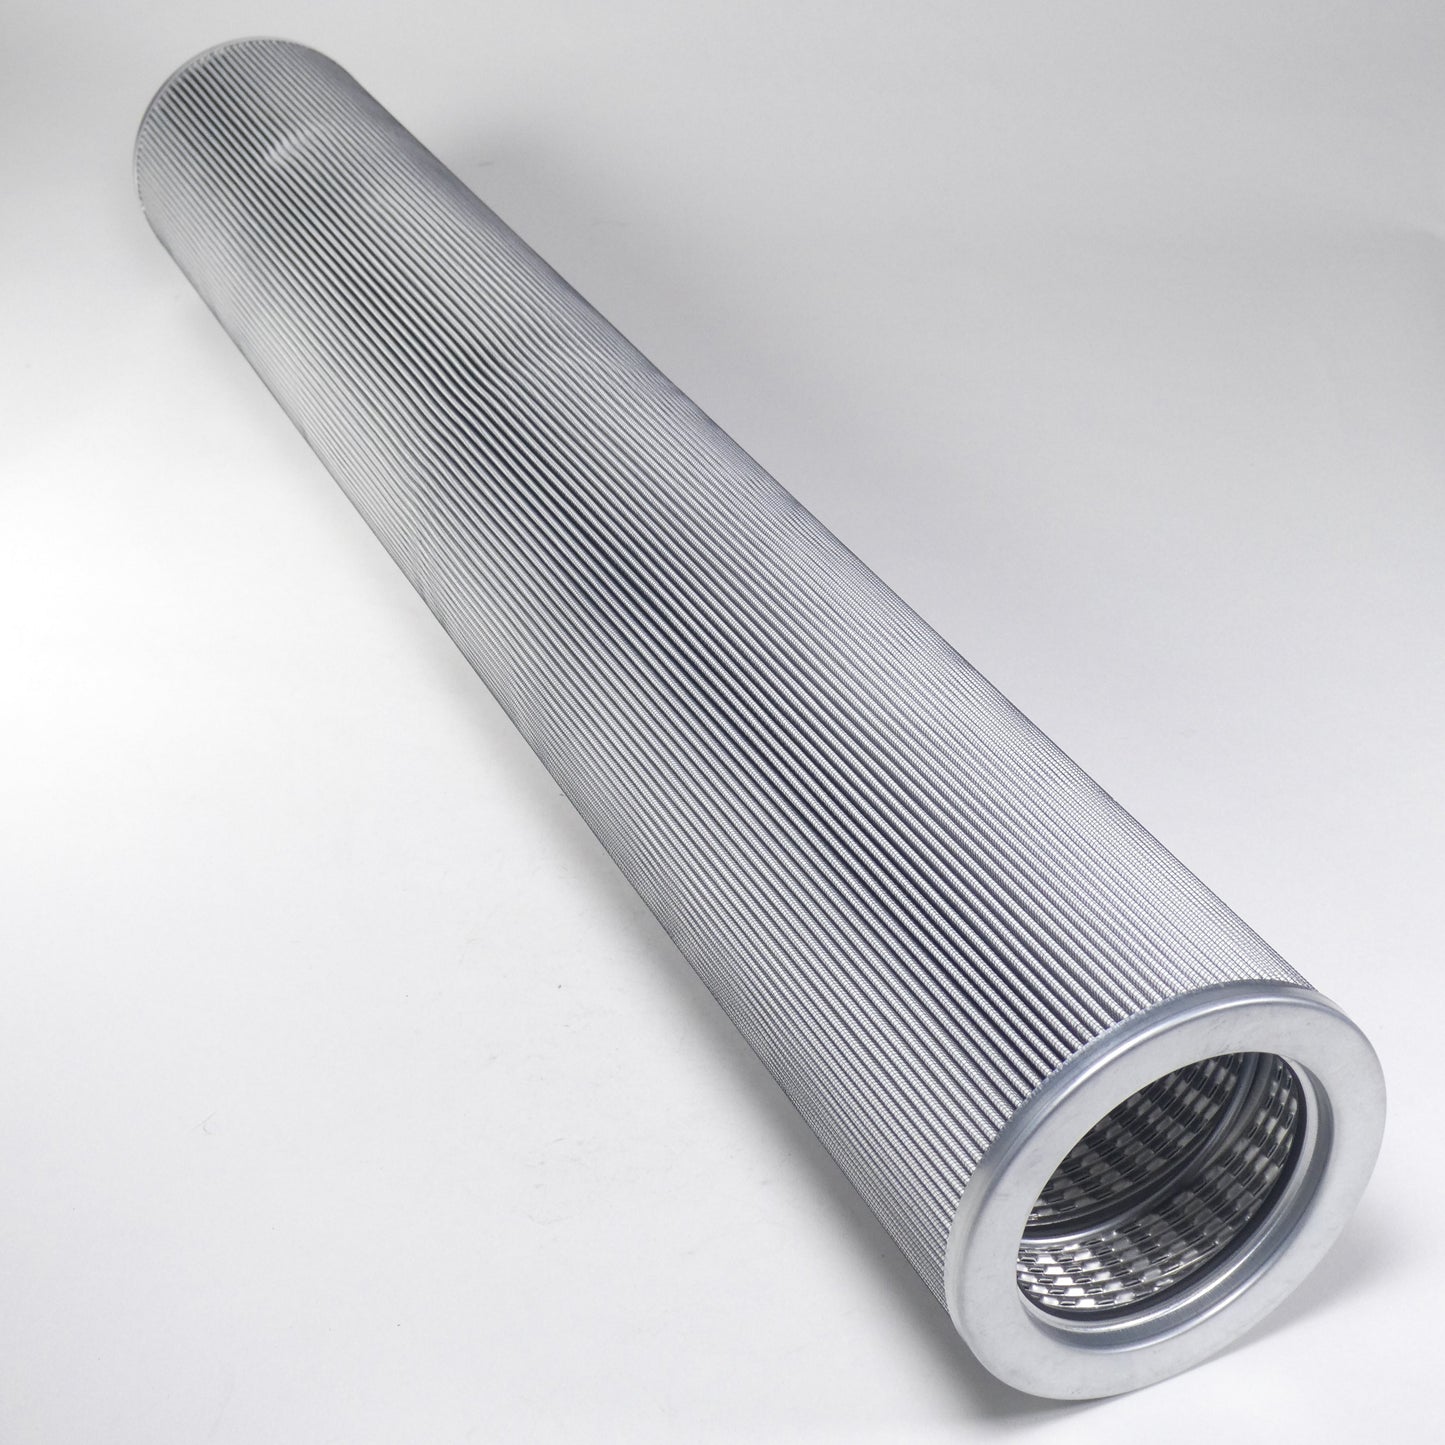 Hydrafil Replacement Filter Element for Porous Media LE8339MS01V